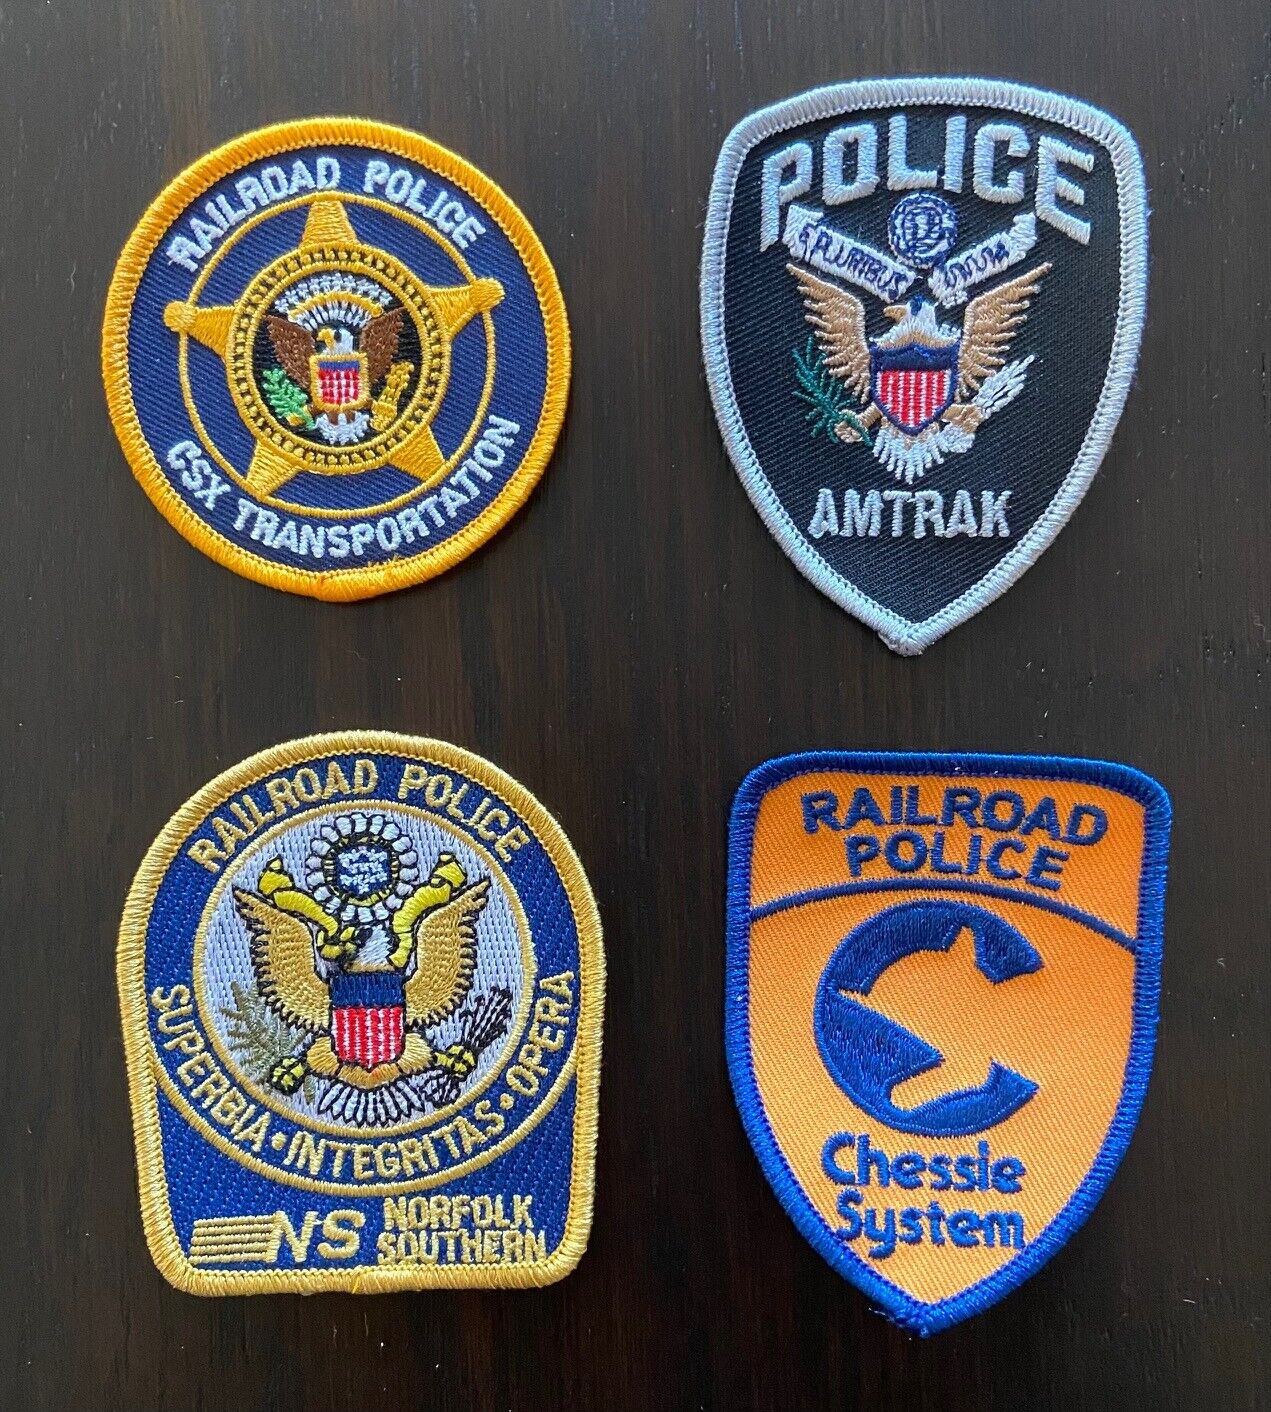 4 - Vintage Railroad police patches